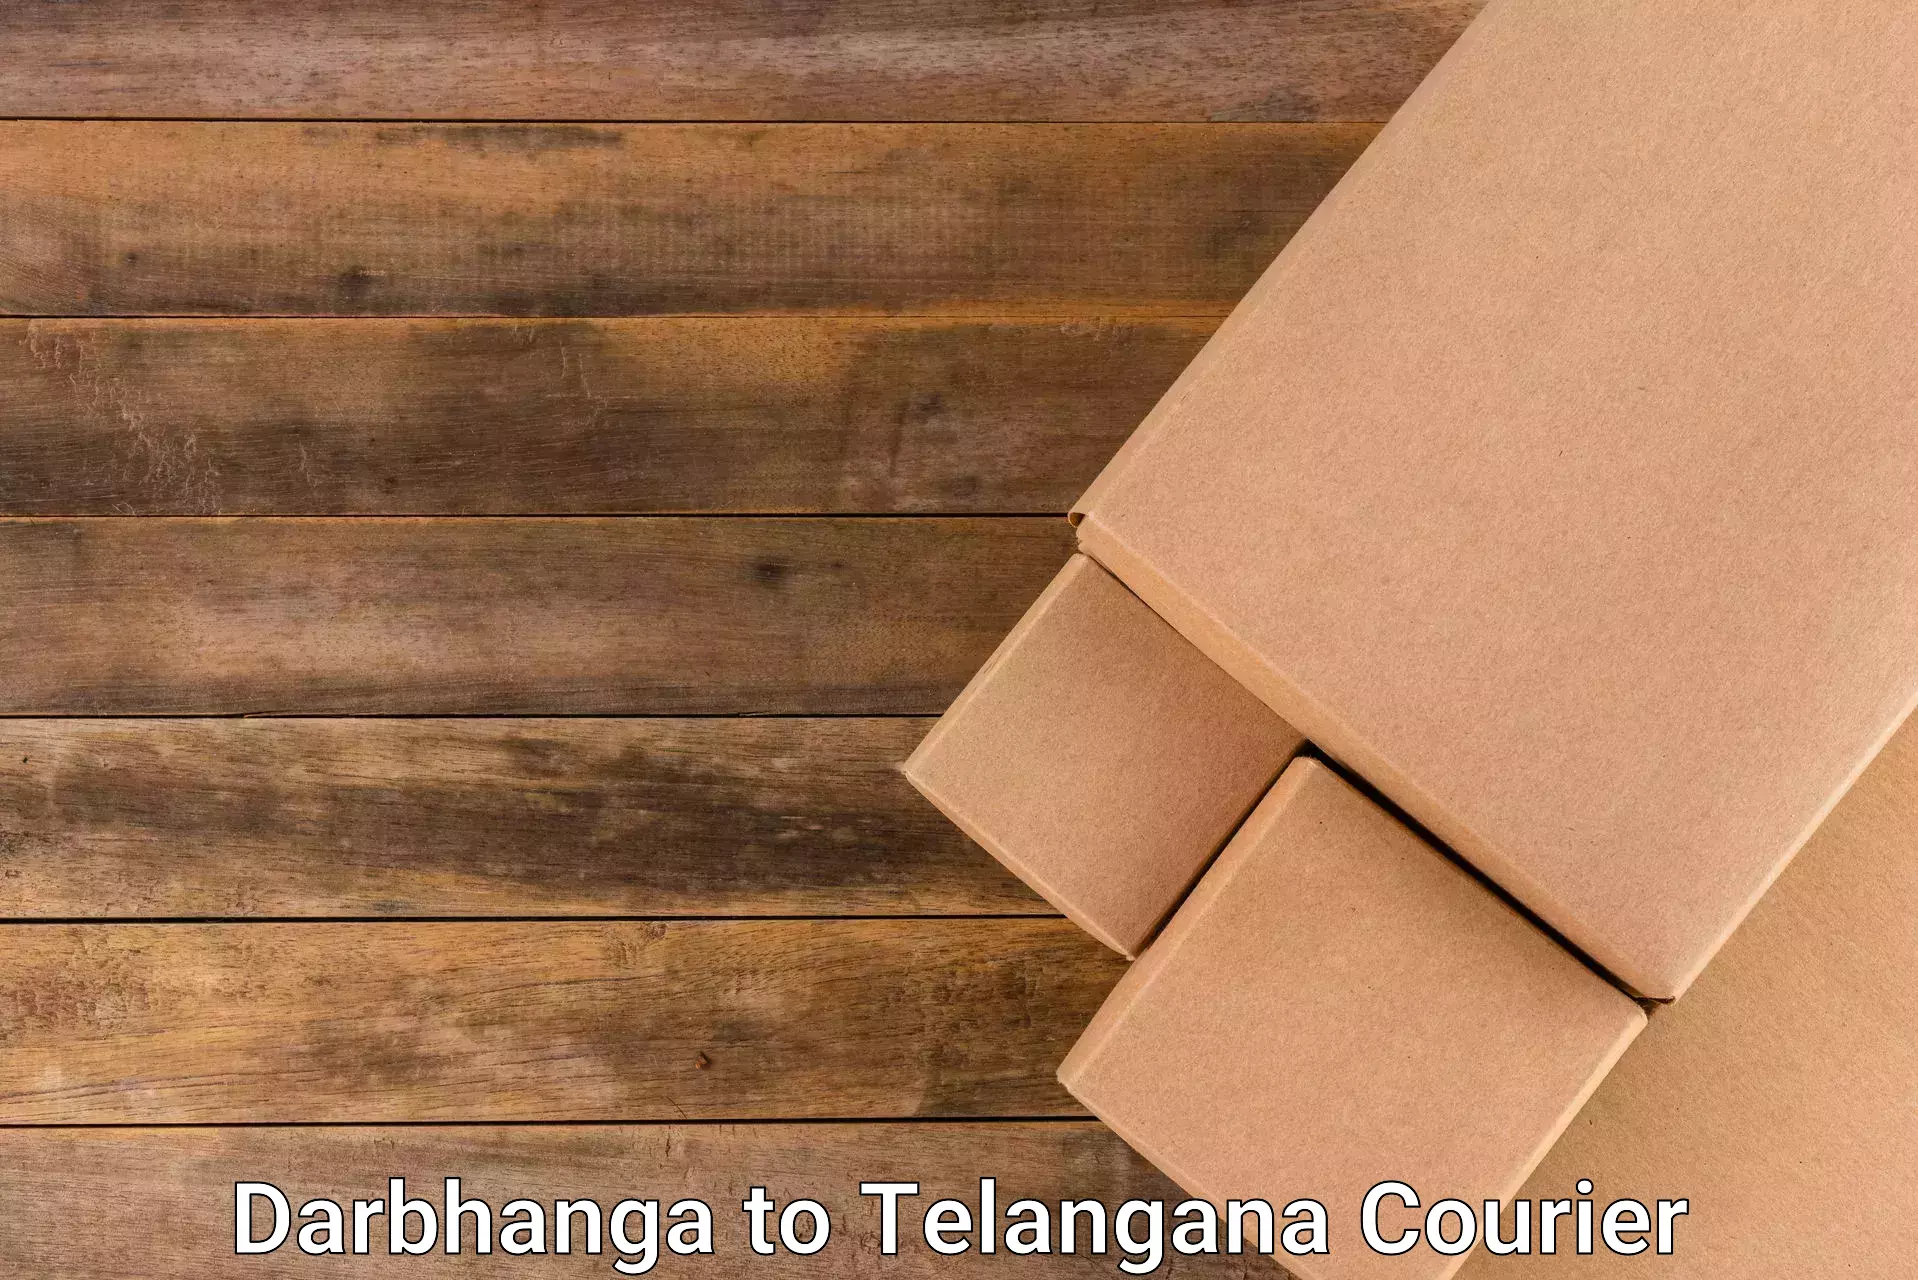 Secure package delivery in Darbhanga to Jannaram